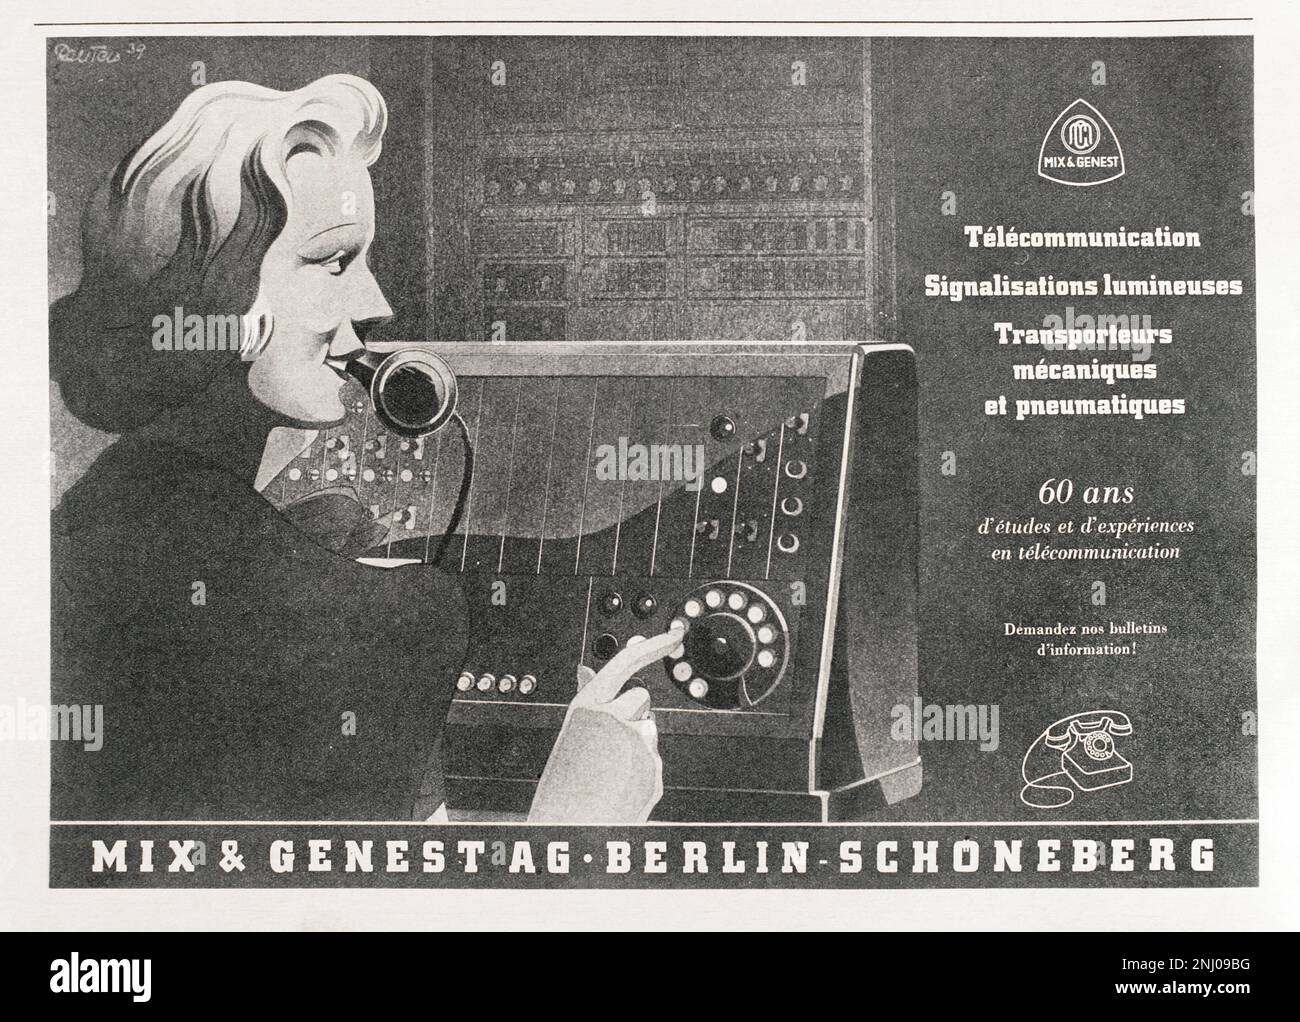 Advertisement for Mix & Genest telephony products on one of the inside pages of the magazine 'Signal', issue number 8 (25 July 1940) of the French edition. This German company was founded on 1 October 1879 by the industrialist Wilhelm Mix and the engineer Werner Genest. 'Signal' was published between April 1940 and April 1945 and was the main propaganda organ of the German army during the Second World War. Stock Photo